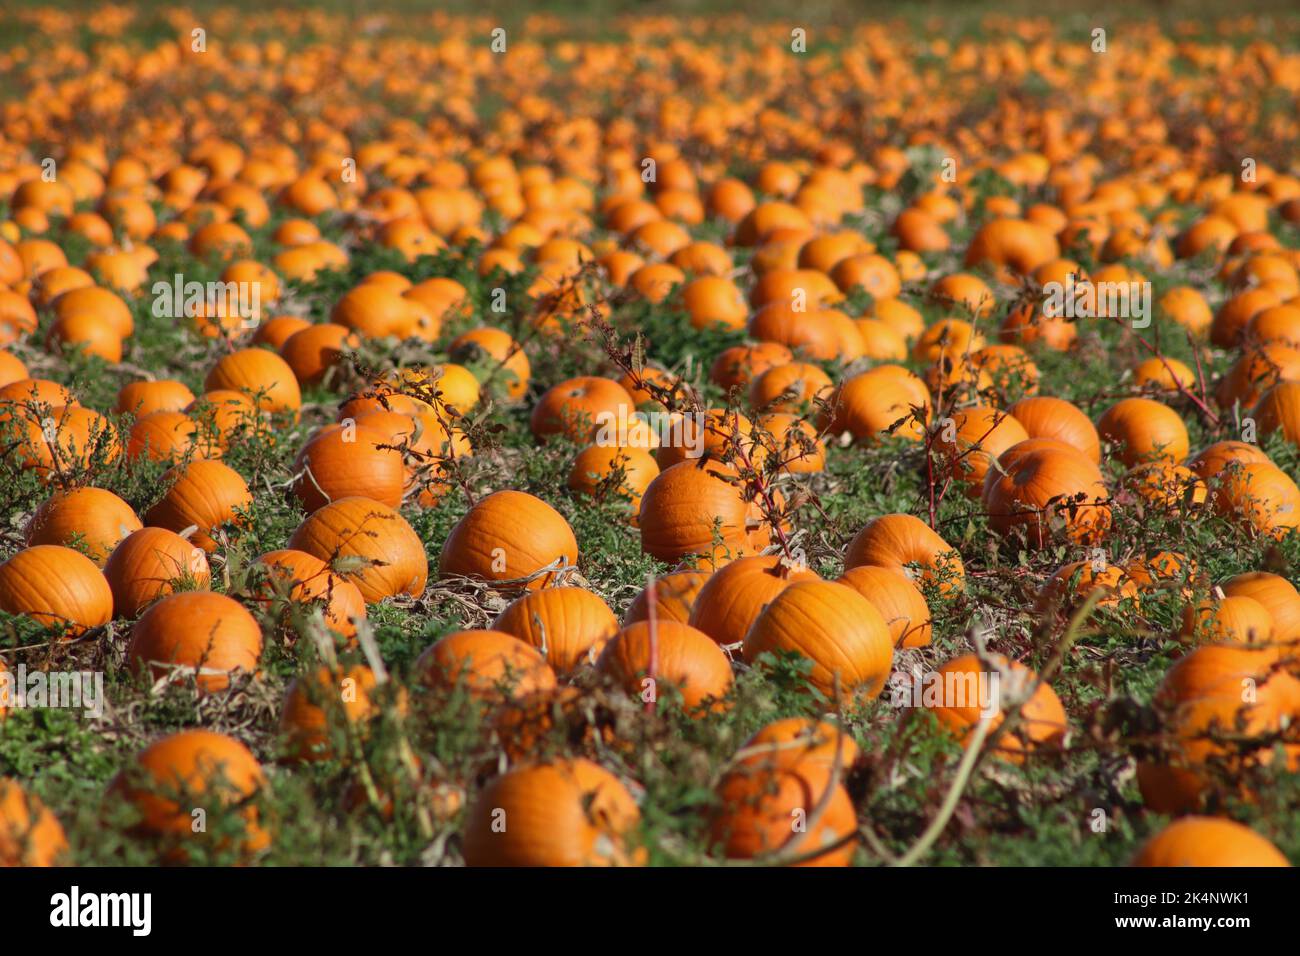 Full frame image of ripe orange pumpkins ready to be harvested Stock Photo